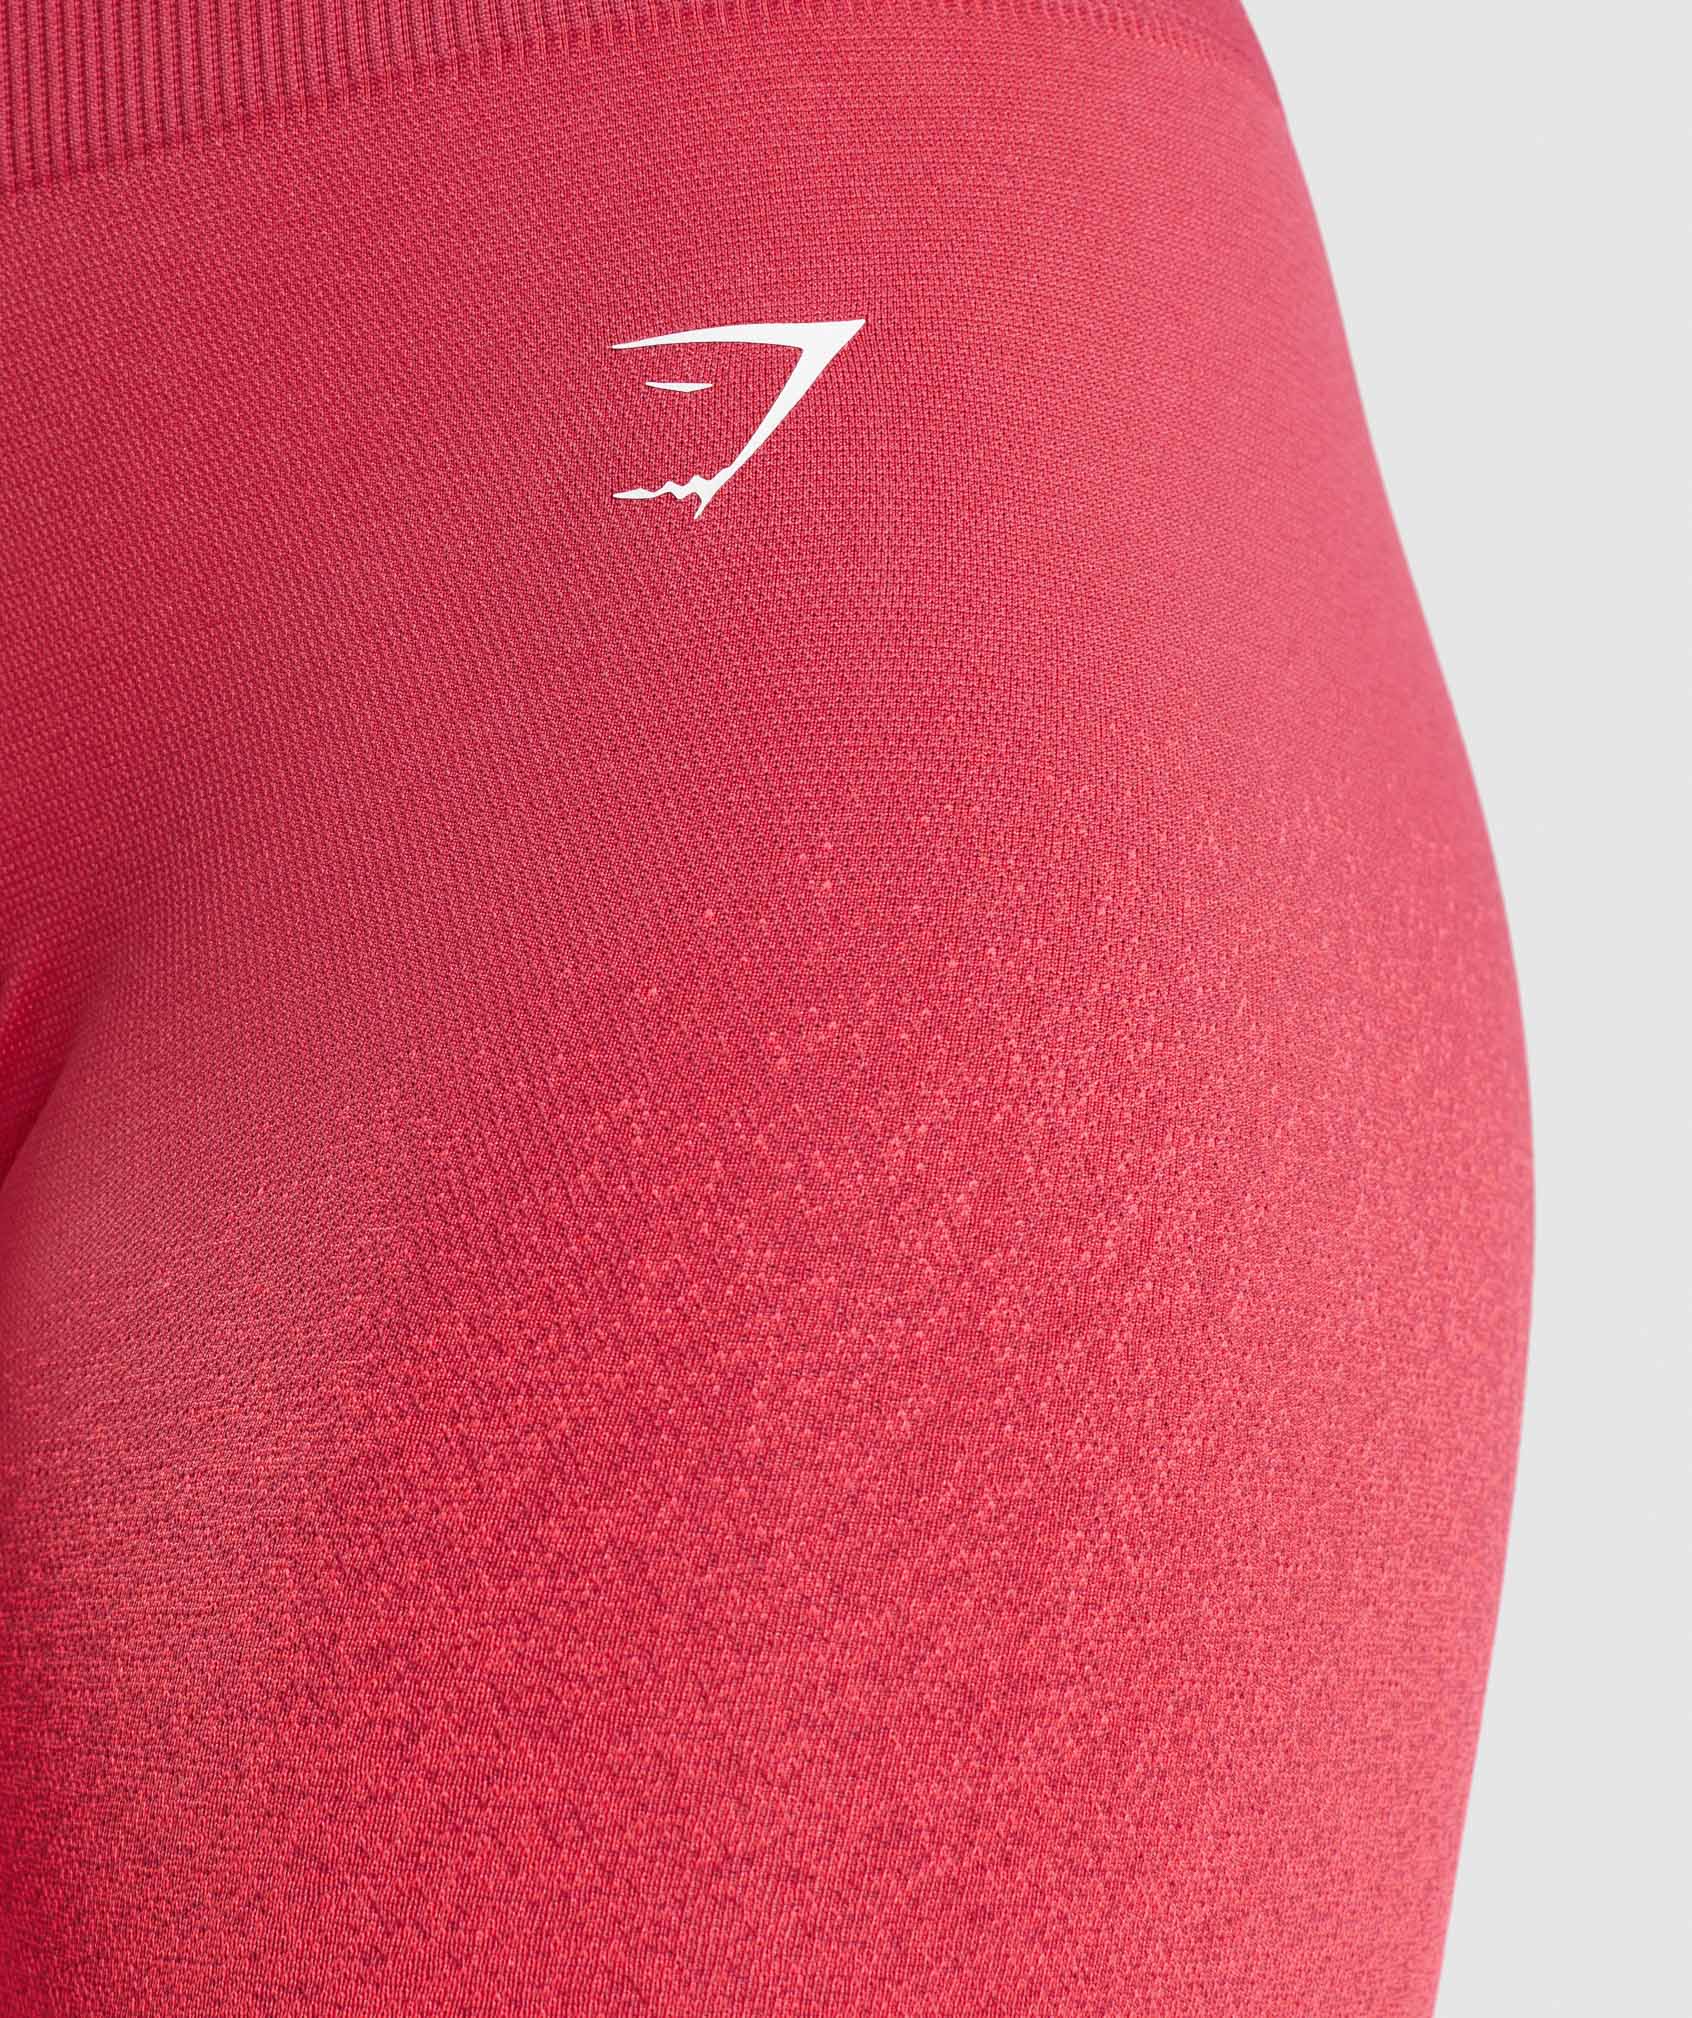 EVERYTHING MUST GO Gymshark ADAPT OMBRE SEAMLESS - Cycling Shorts - Women's  - red marl/red - Private Sport Shop